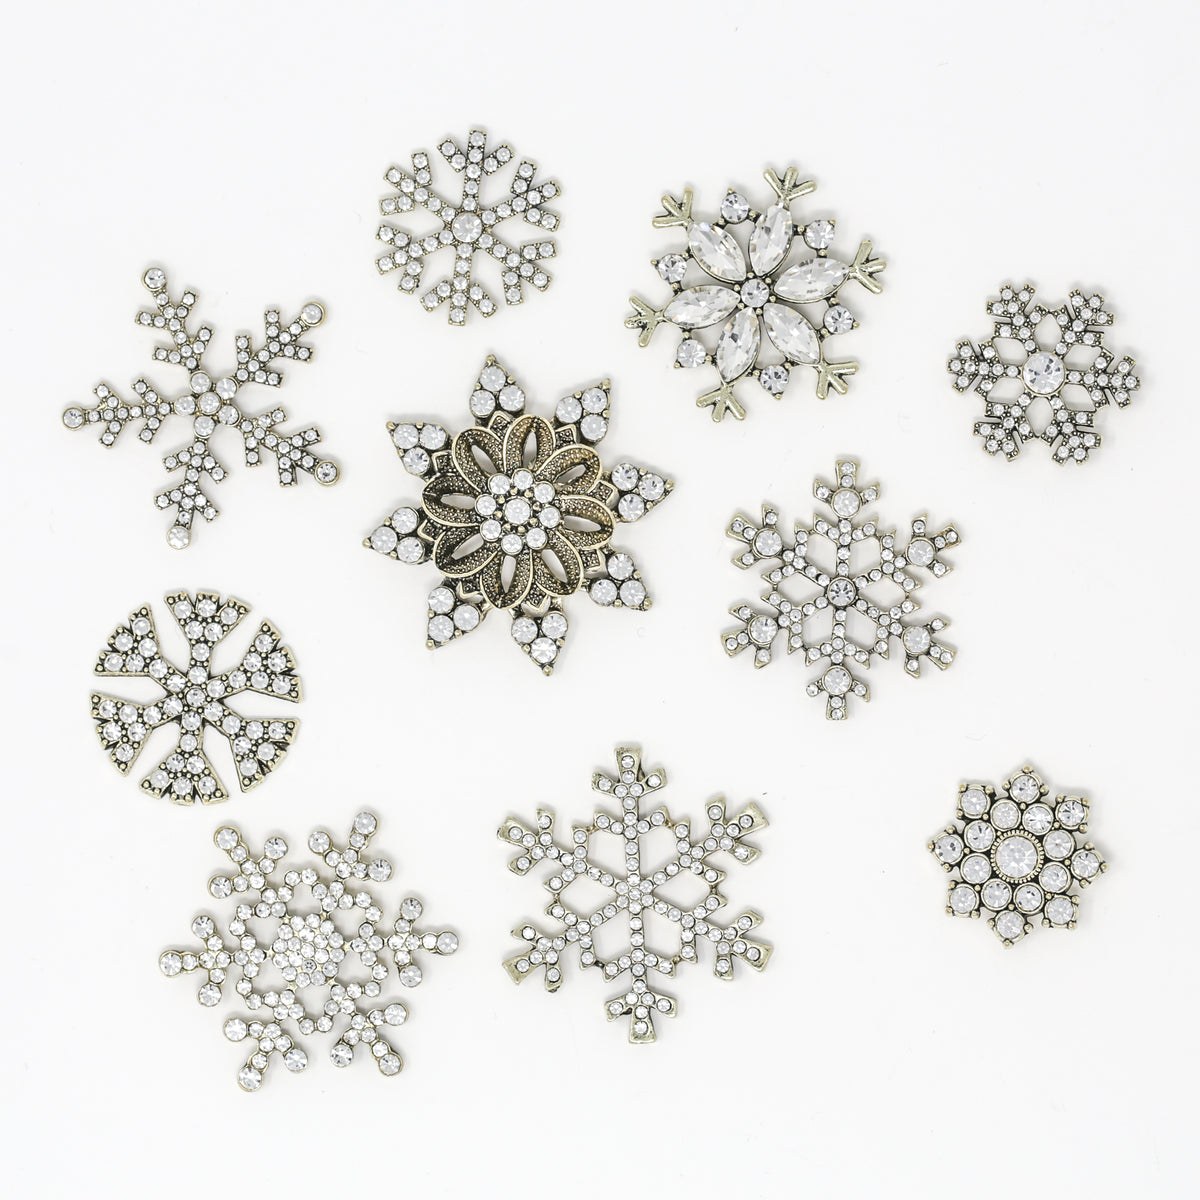 Antique Bronze Snowflake Pack - Totally Dazzled